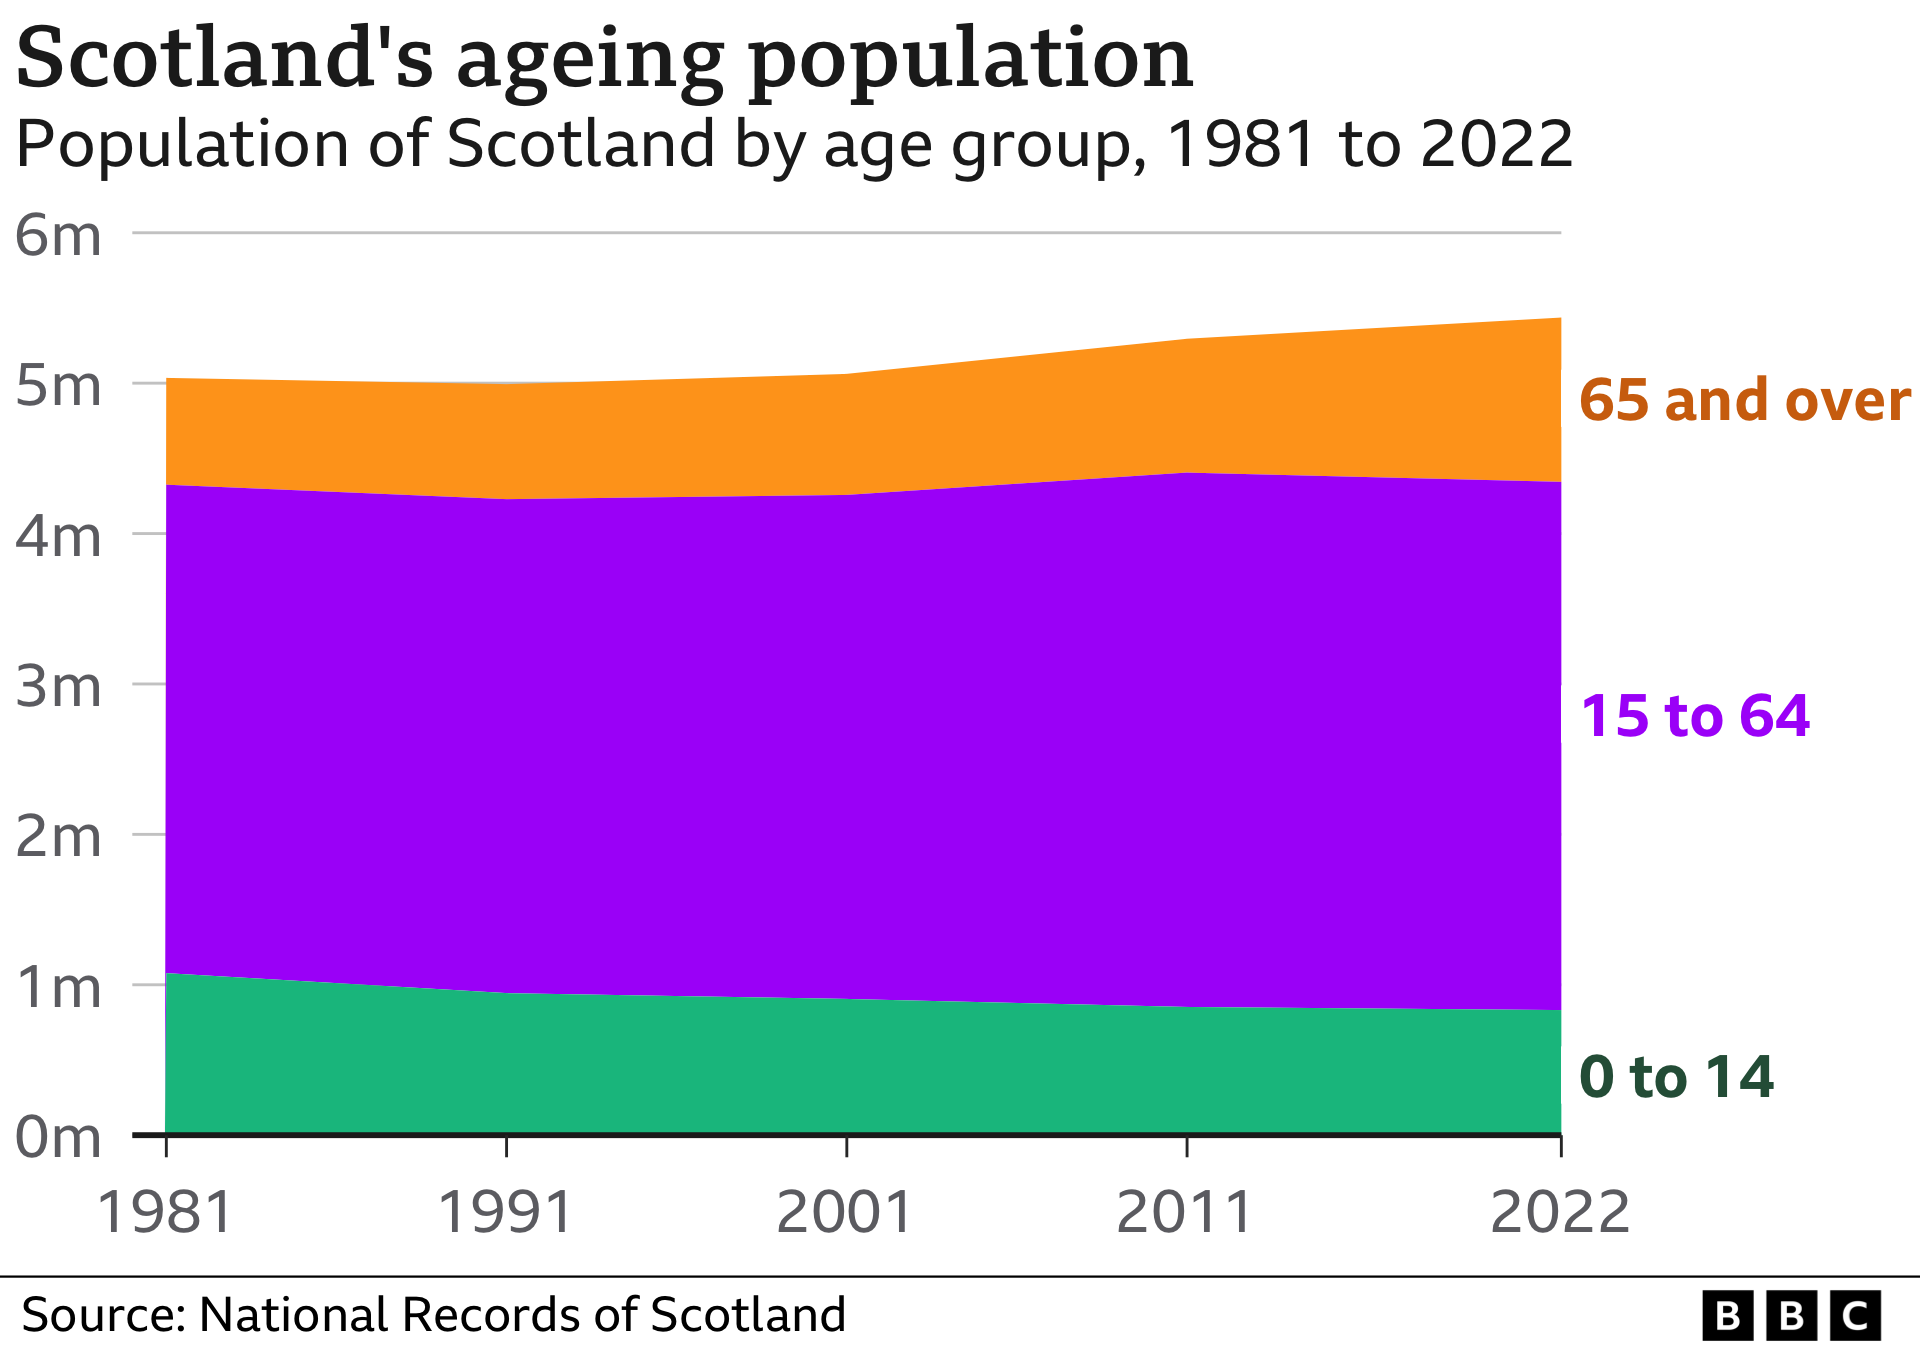 Chart showing the changing age profile of Scotland’s population between 1981 and 2022. It shows the total population increasing from 5 million to 5.4 million, with those aged 65 and over making up an increasing proportion of the total – from 14% in 1981 to 20% in 2022.